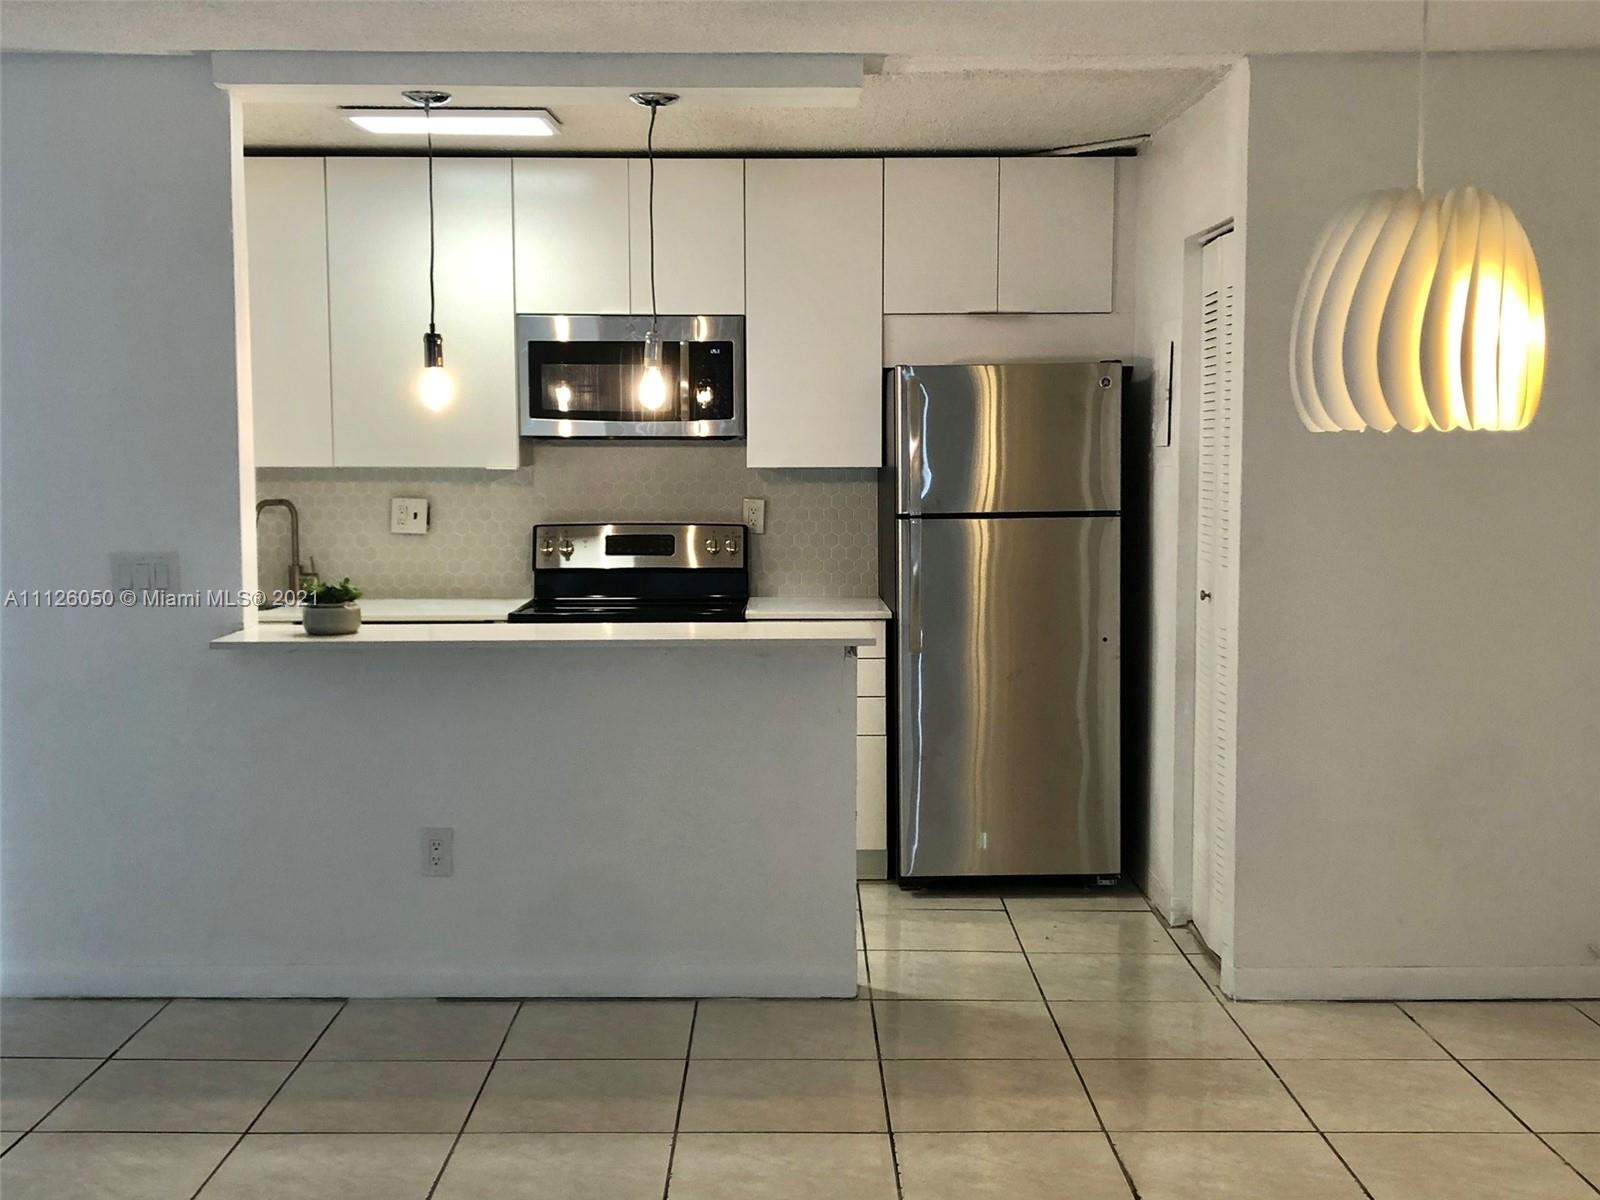 a kitchen with stainless steel appliances a refrigerator a stove a microwave and cabinets